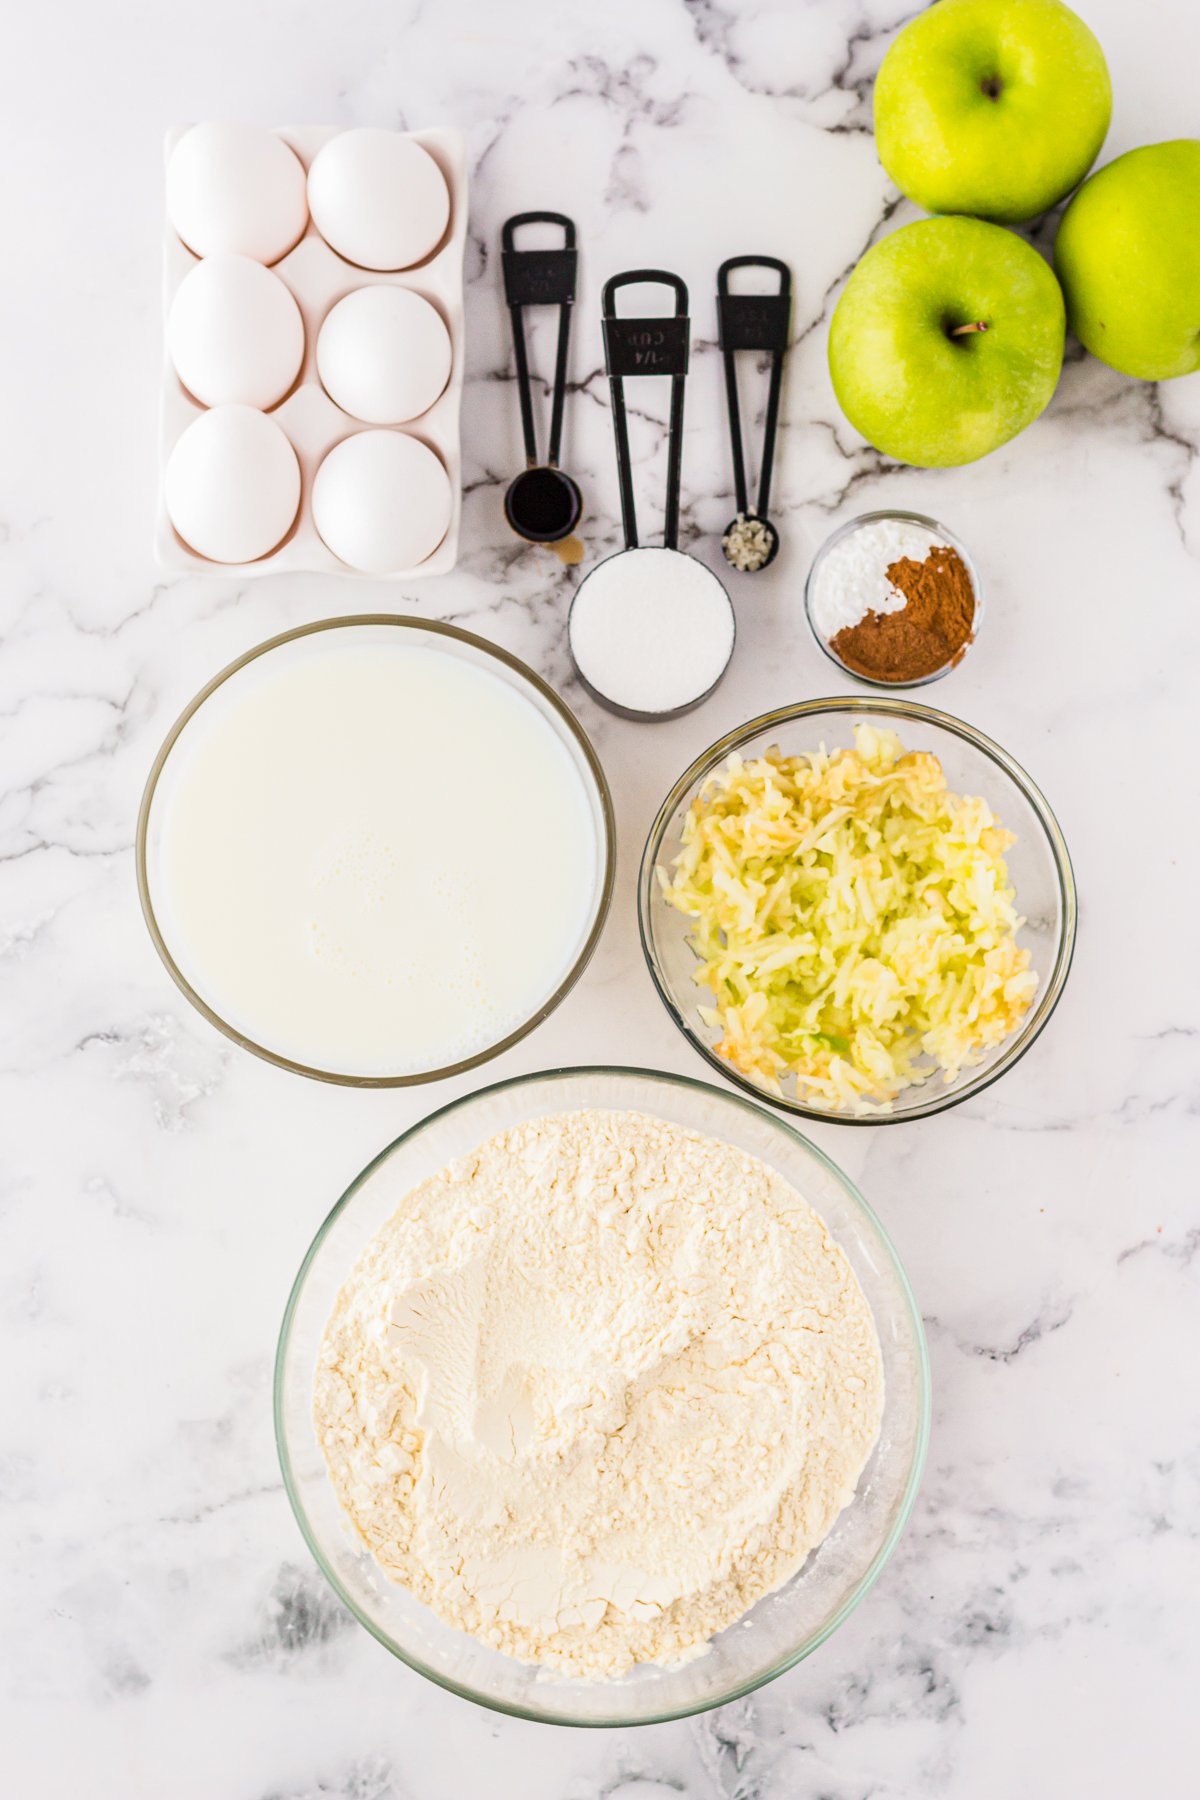 Ingredients needed to make Caramel Apple Funnel Cakes